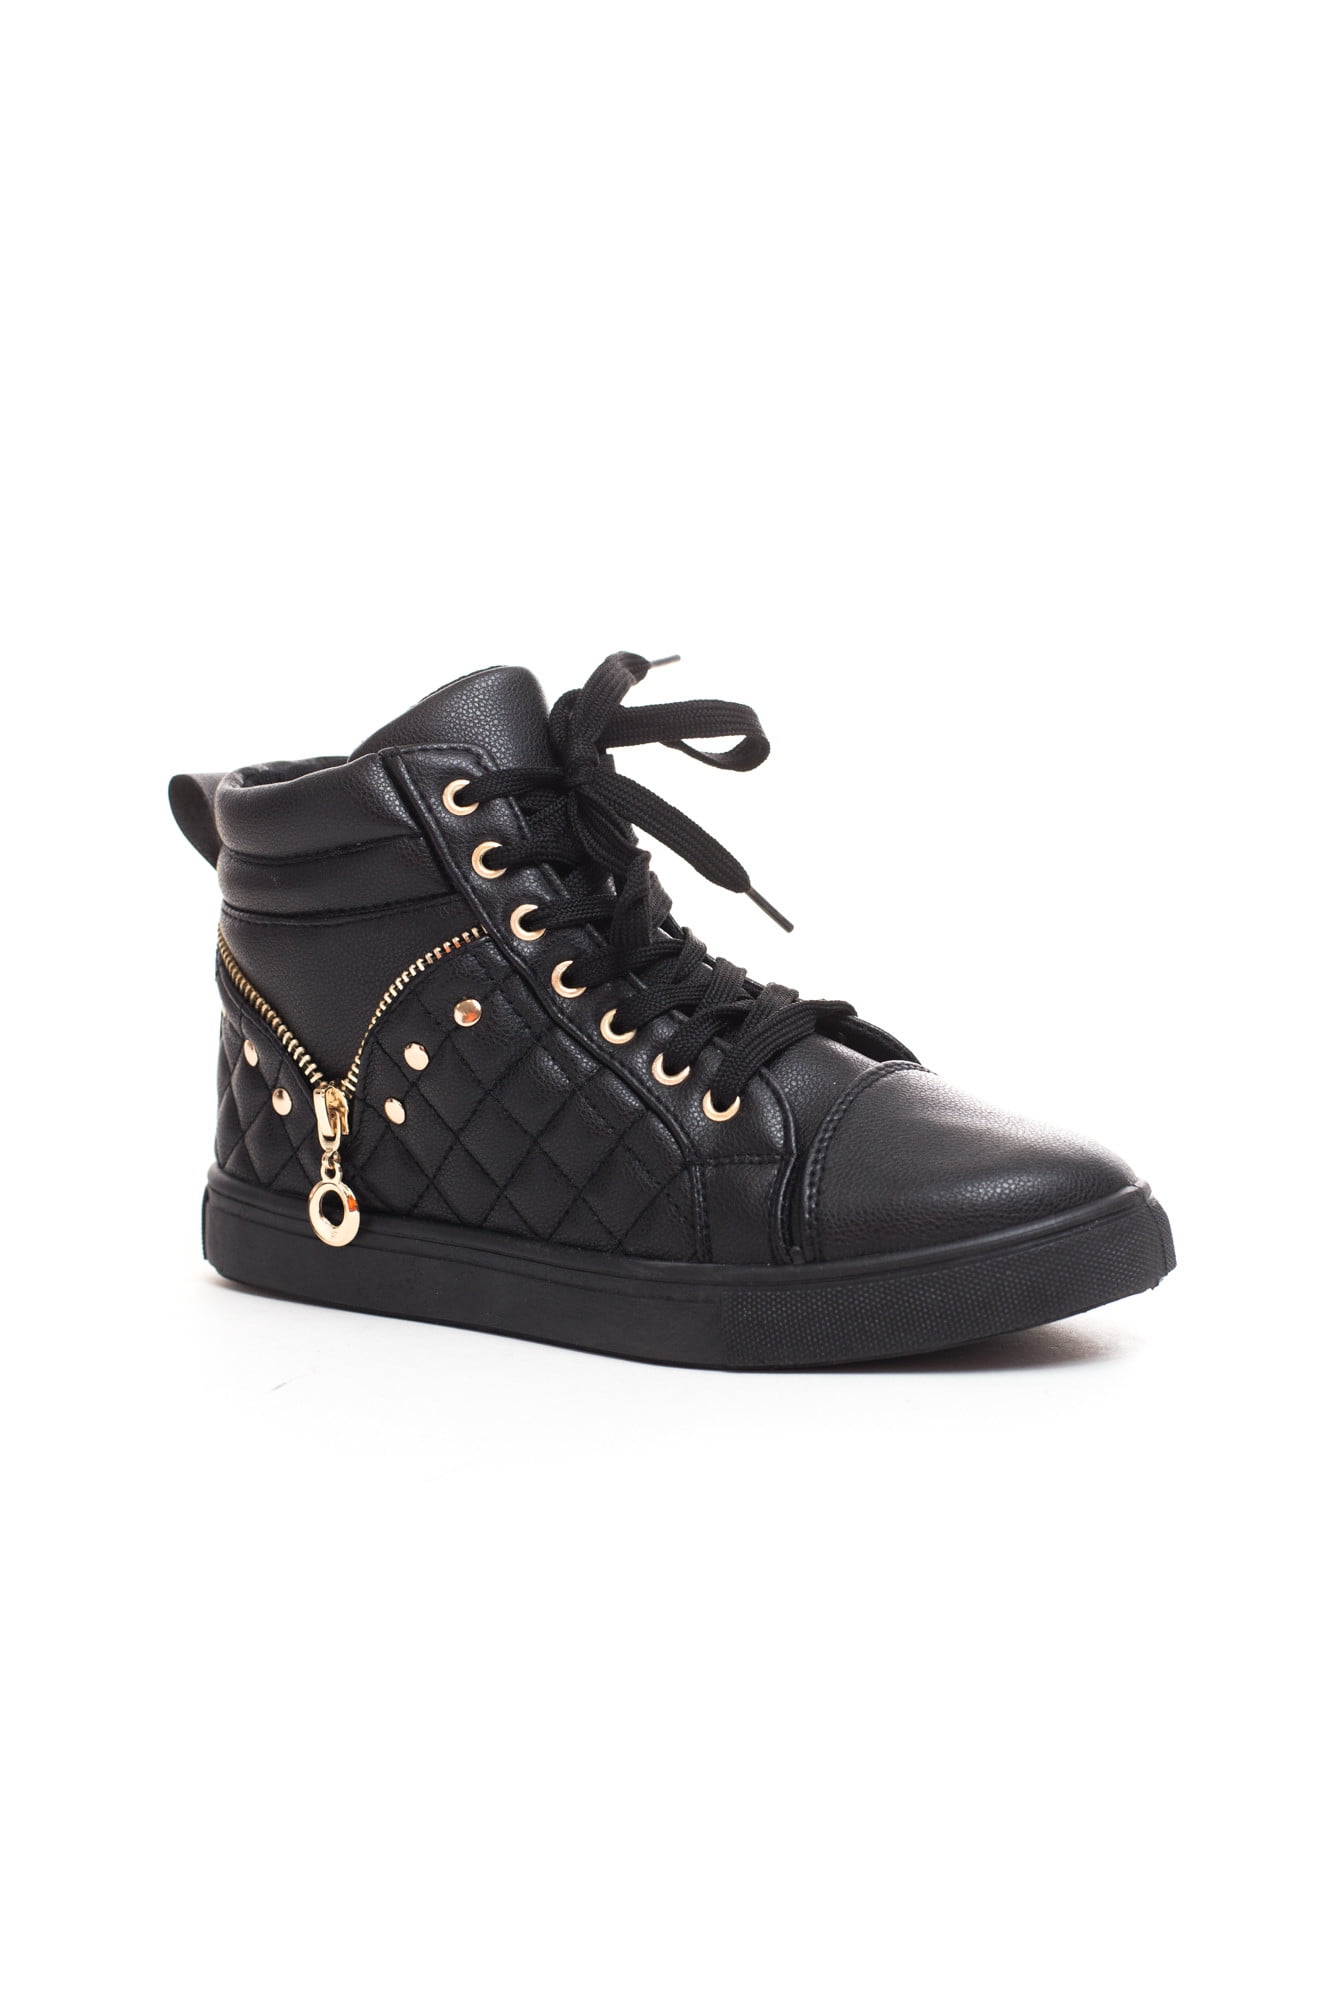 Soho Shoes Women's Leatherette Quilted Lace Up High Top Sneakers ...